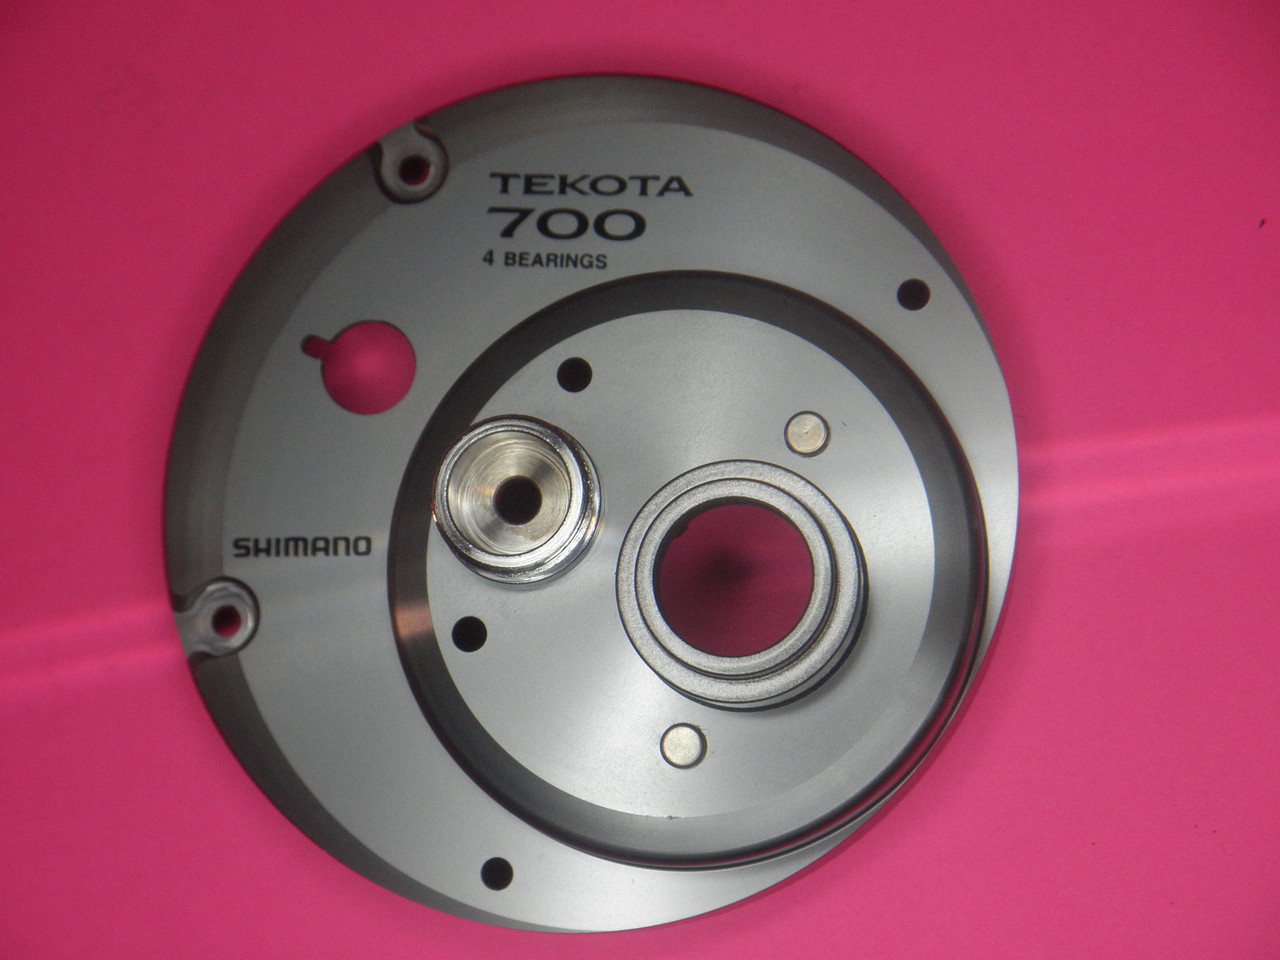 SHIMANO TGT0561 & 10HKA RIGHT SIDE PLATE FOR TEKOTA 700 TROLLING REELS -  Tuna's Reel Troubles